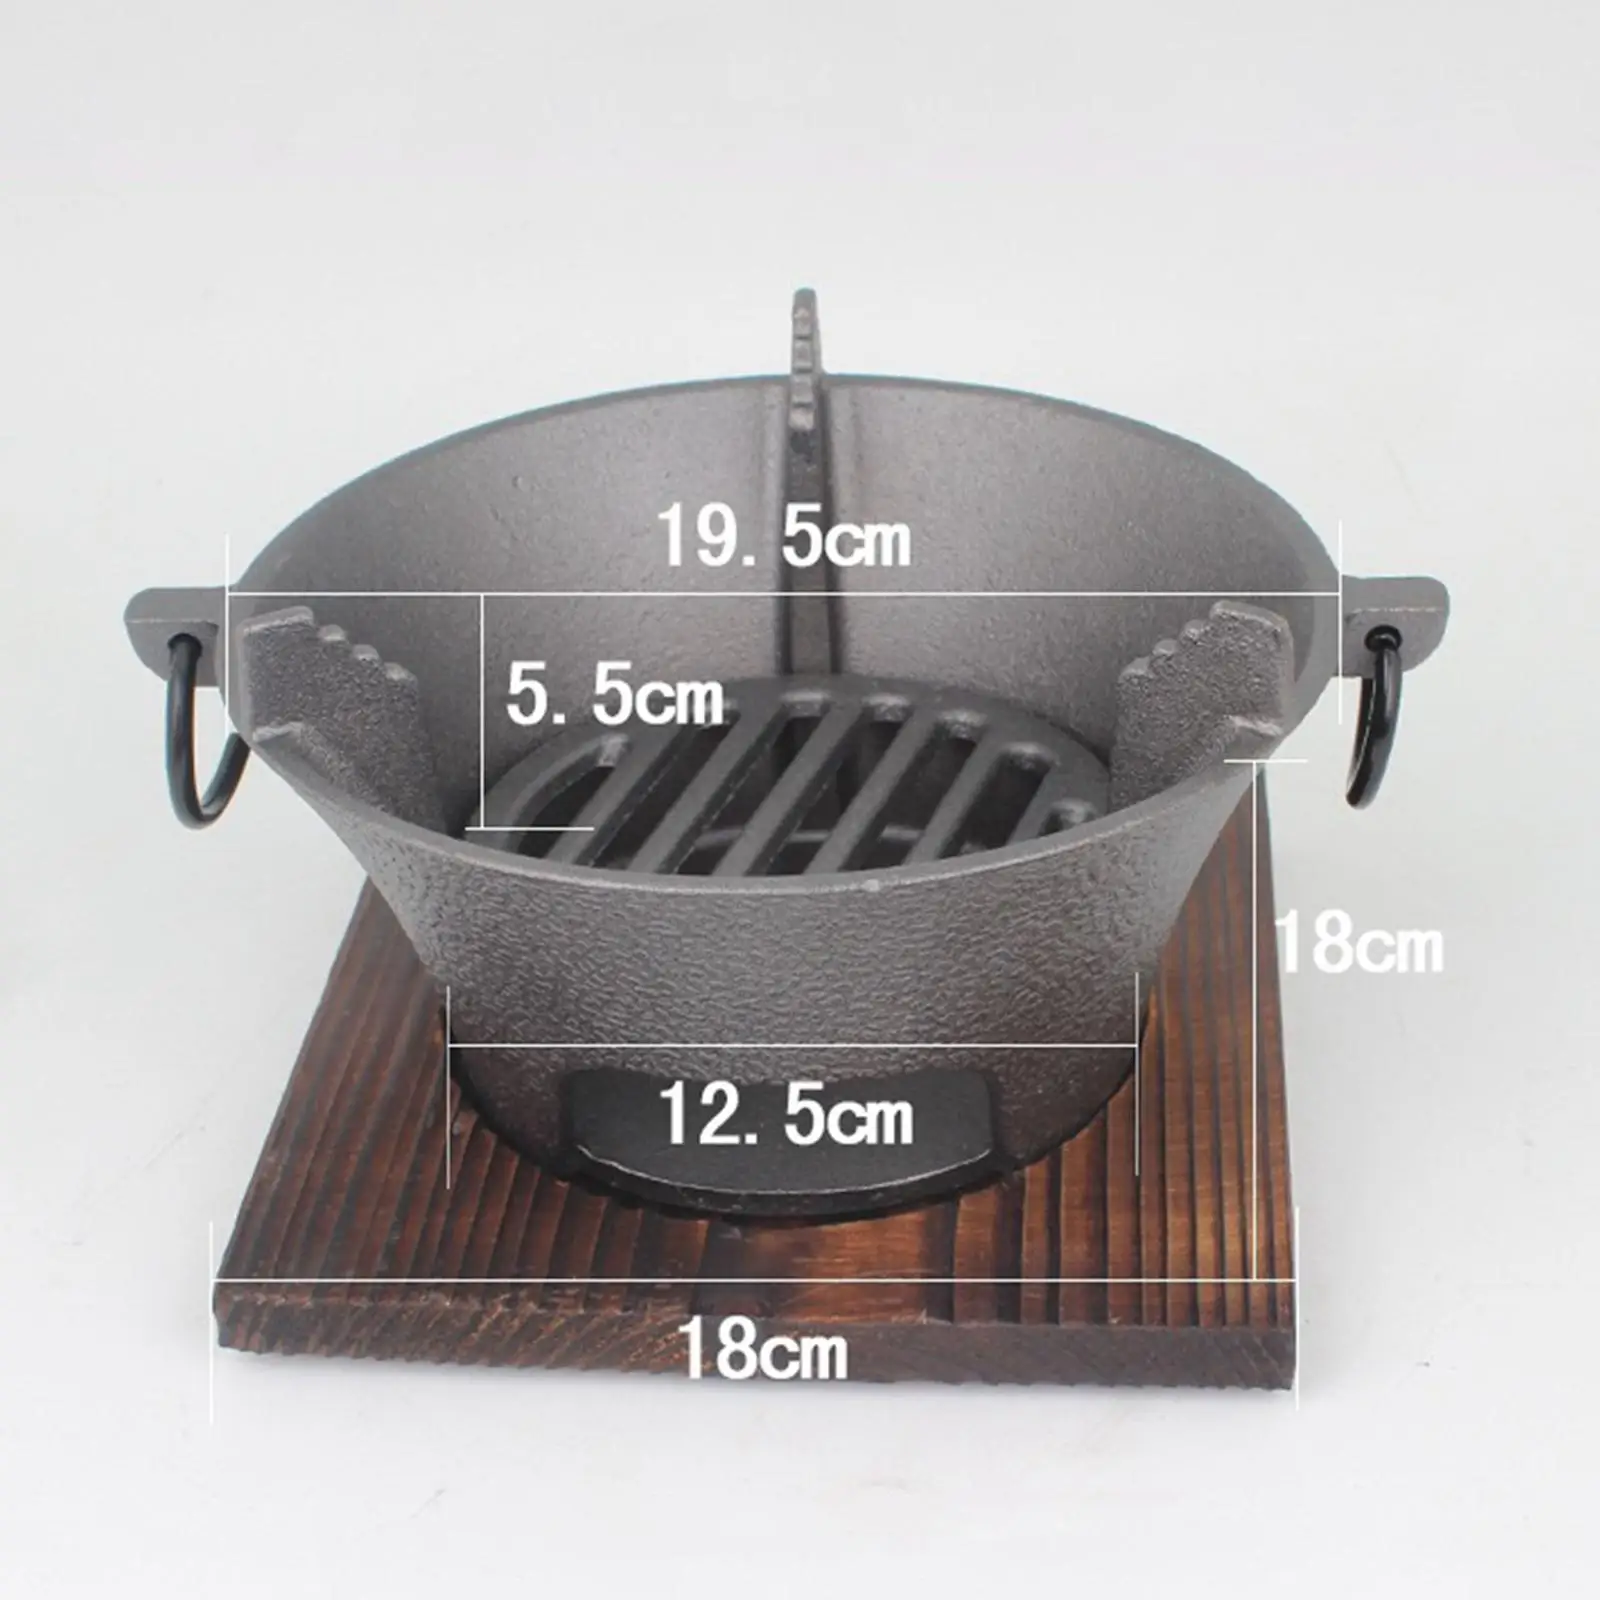 Multifunctional BBQ Stove Wooden Shelf, Kitchenware Cooking Utensil Barbecue Stove Furnace Grate for Barbecue Hiking Camping